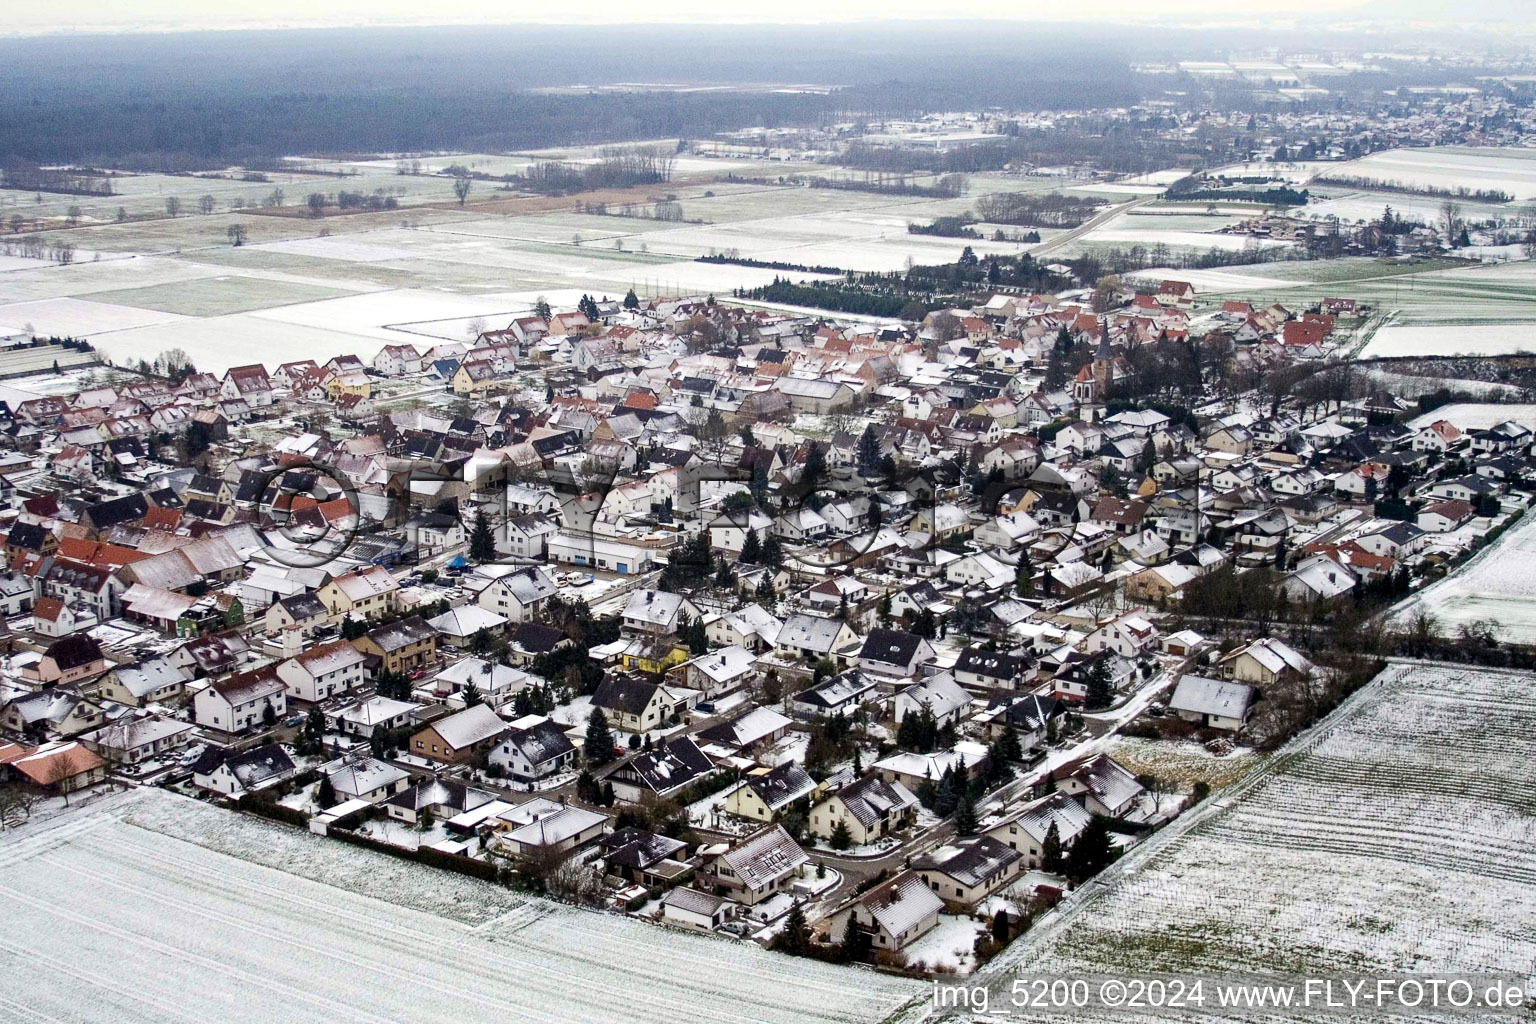 Wintry snowy Village - view on the edge of agricultural fields and farmland in Freckenfeld in the state Rhineland-Palatinate